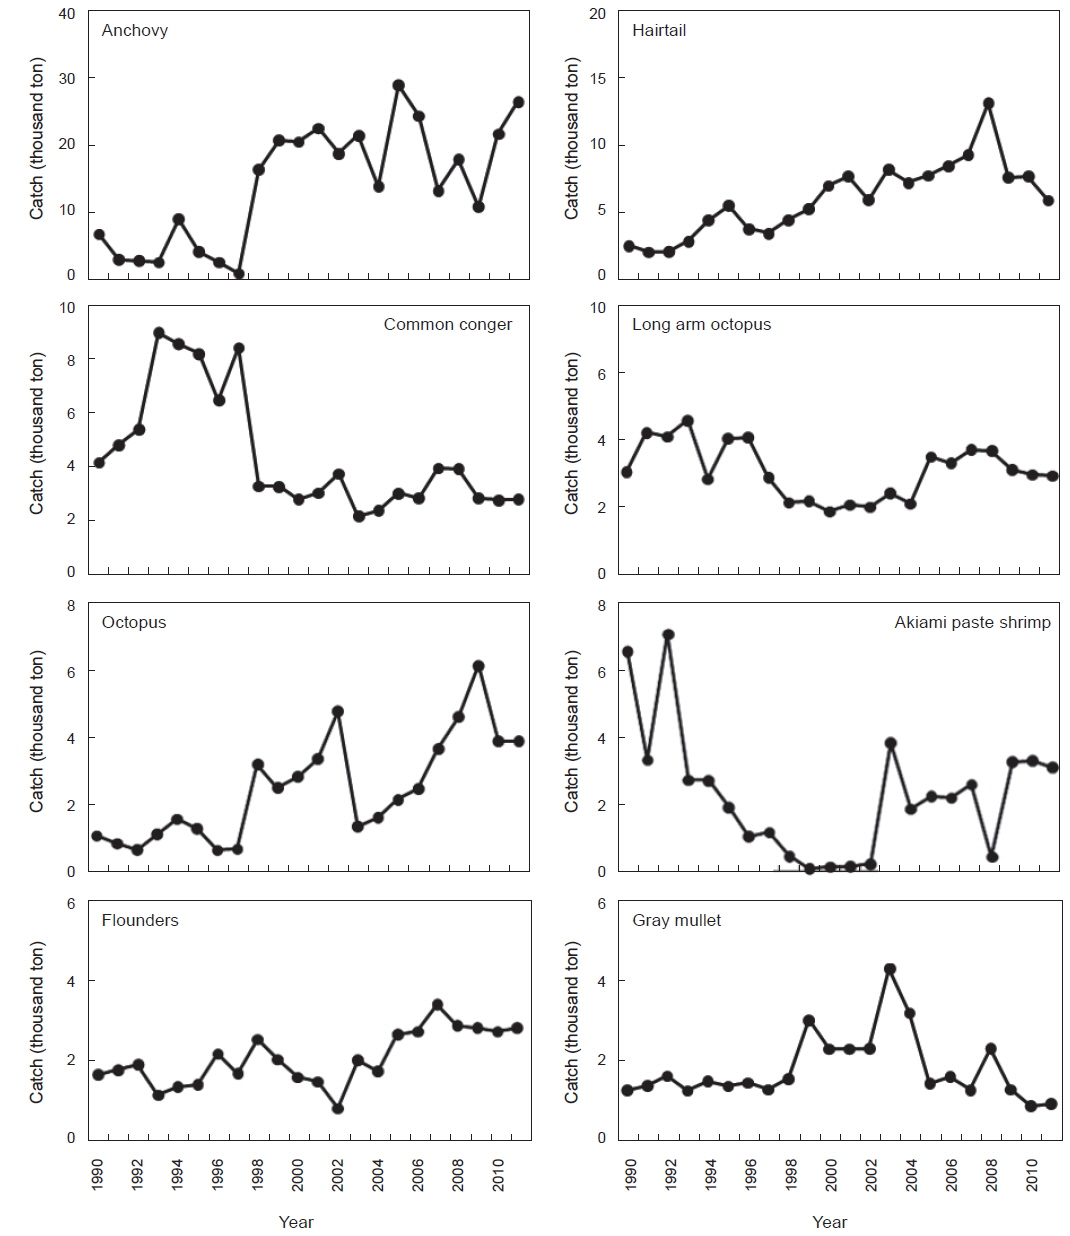 Variations in catch by species caught by coastal fisheries in the South Sea from 1990 to 2011.